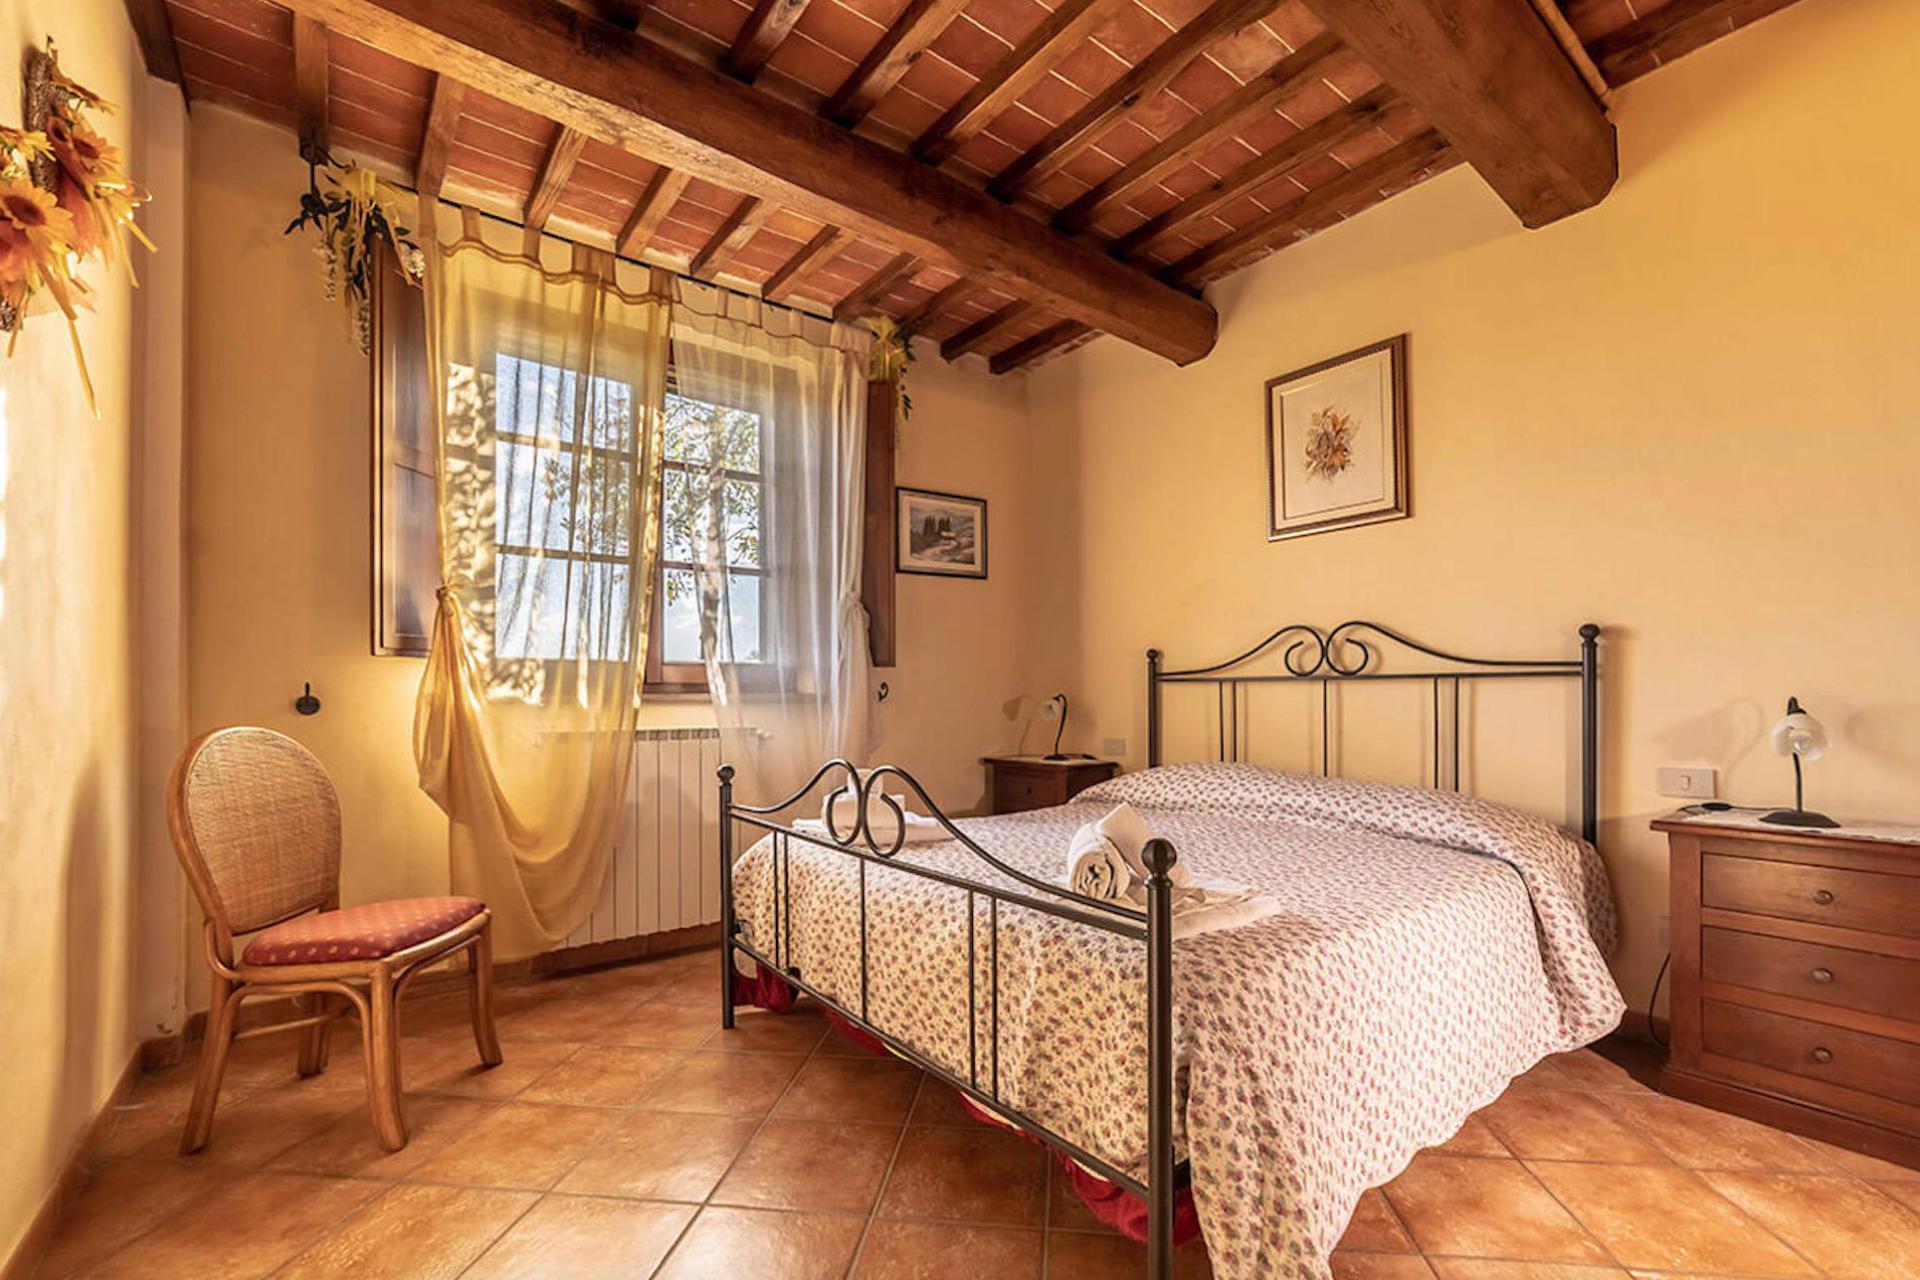 Agriturismo Tuscany Agriturismo Tuscany, kid friendly and super welcoming!